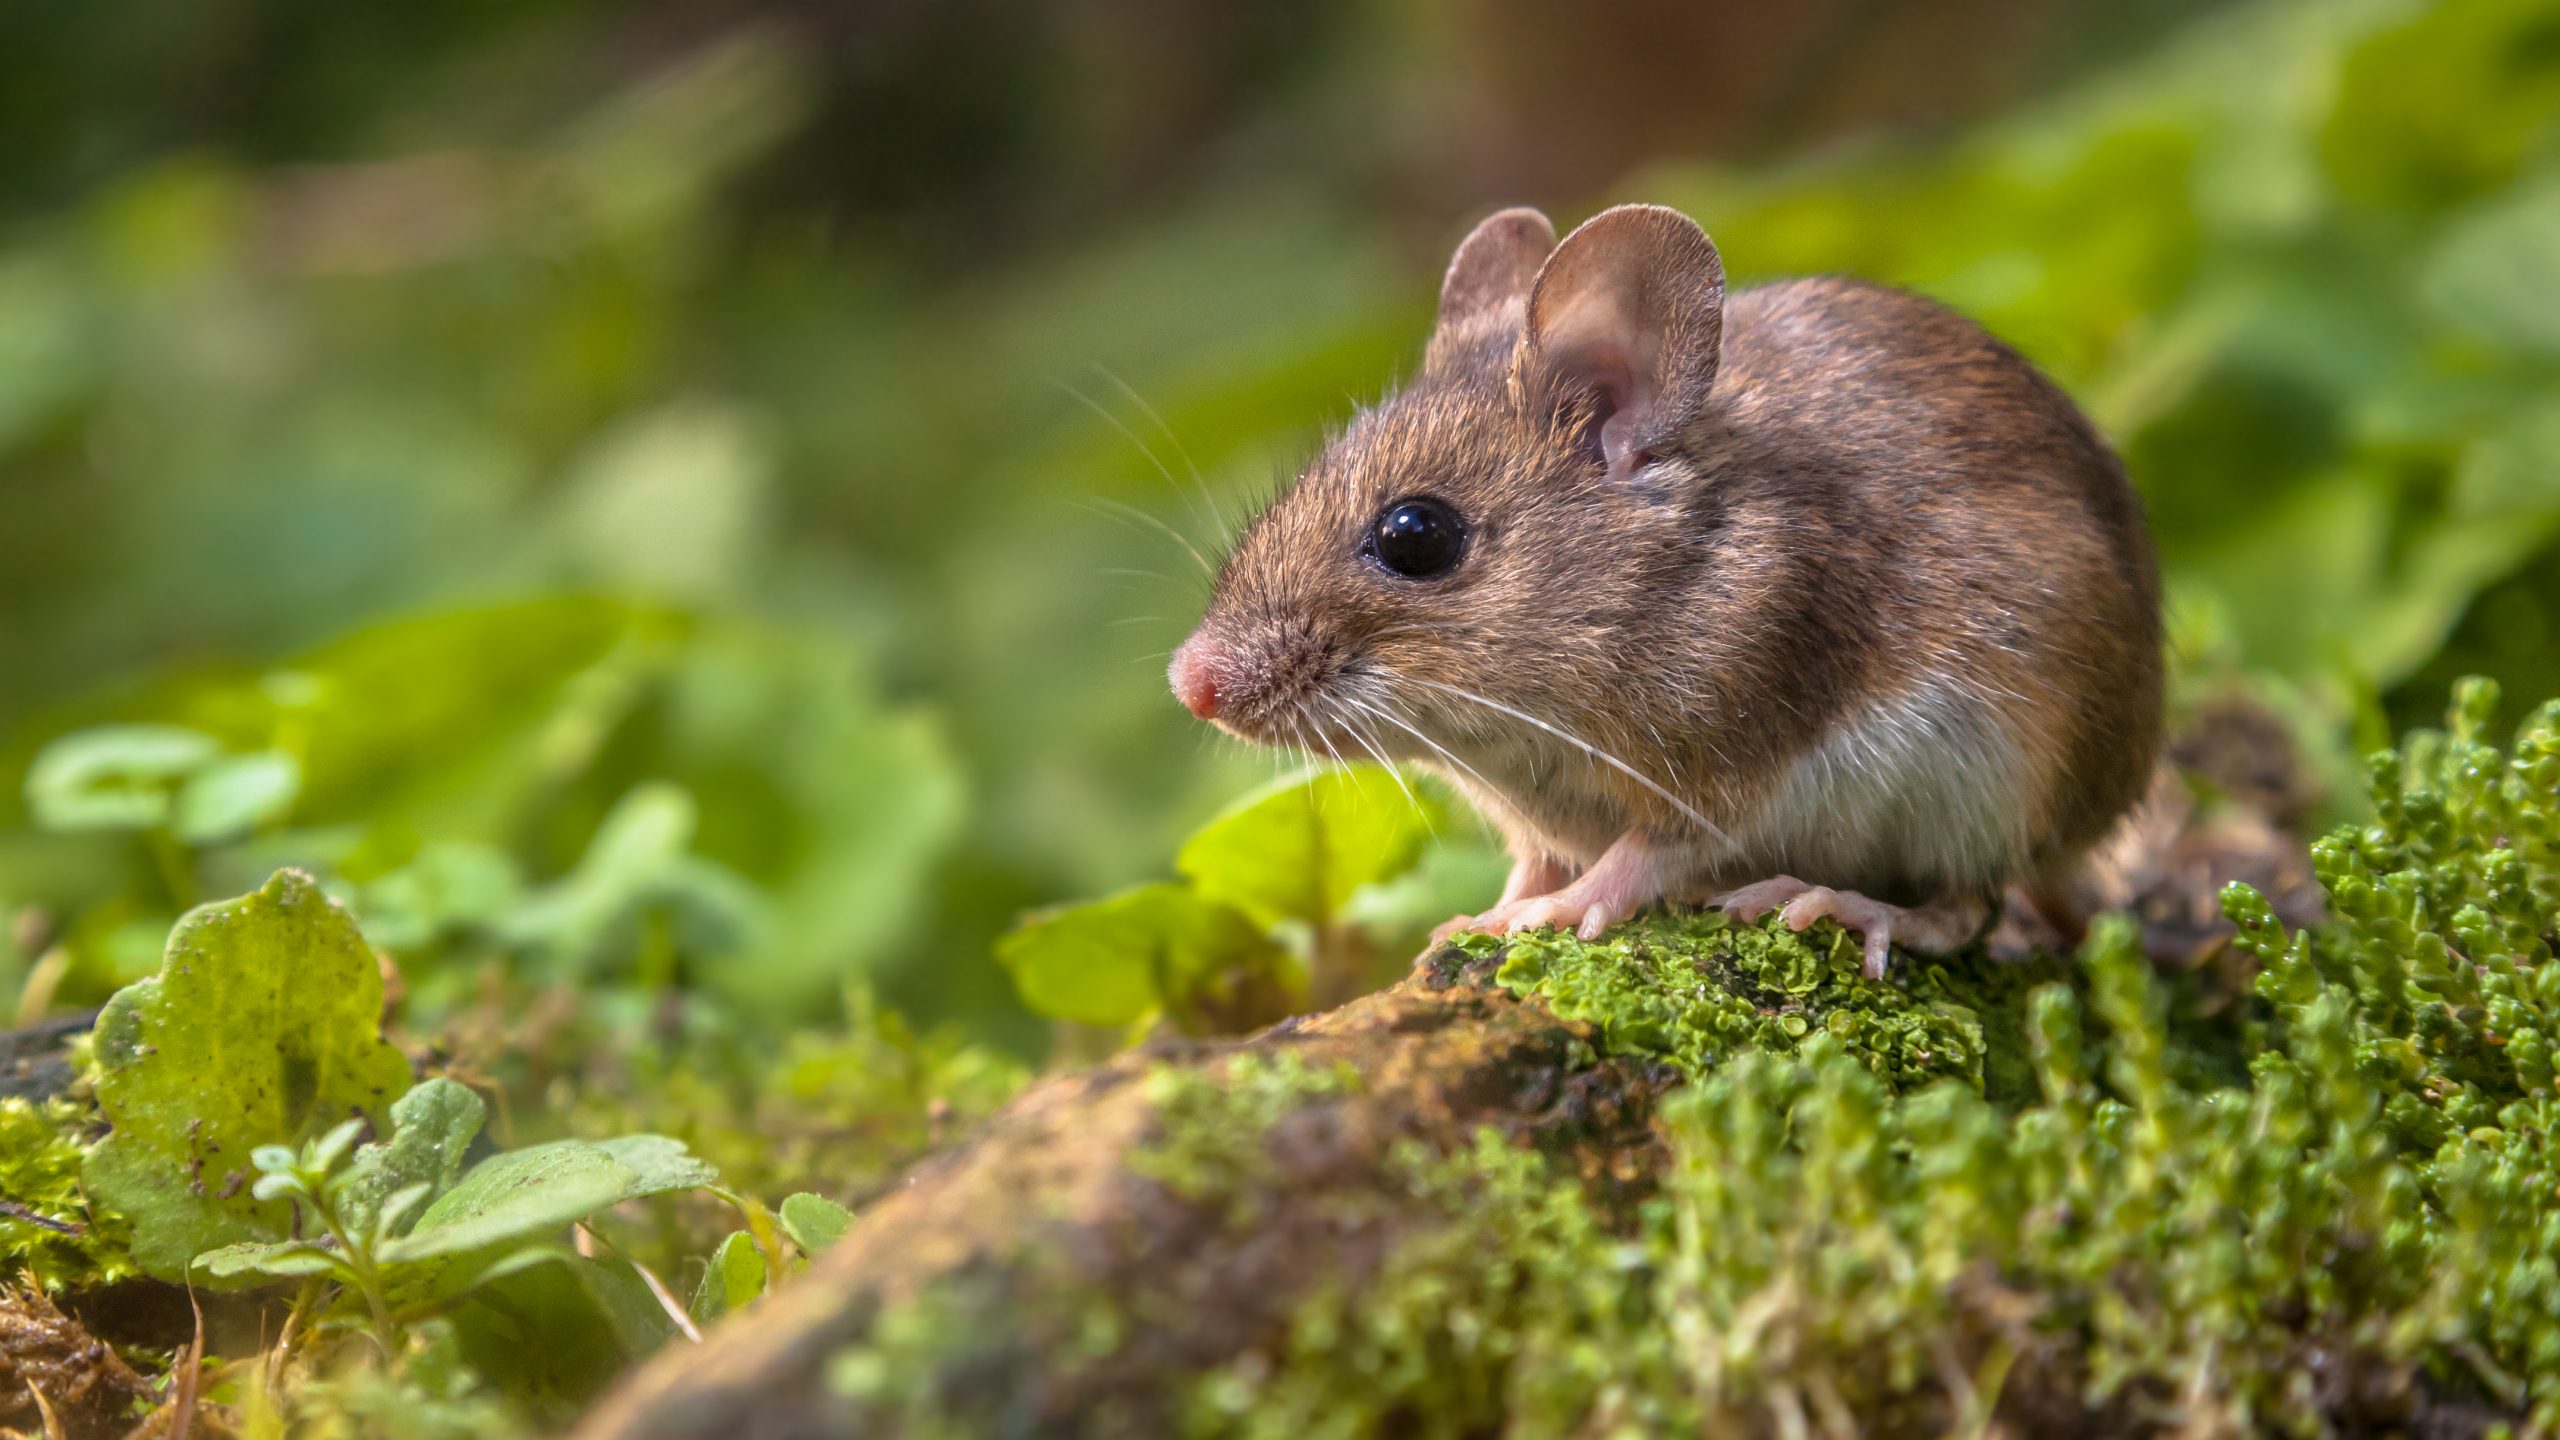 Wild Wood mouse (Apodemus sylvaticus) resting on a log on the forest floor with lush green vegetation